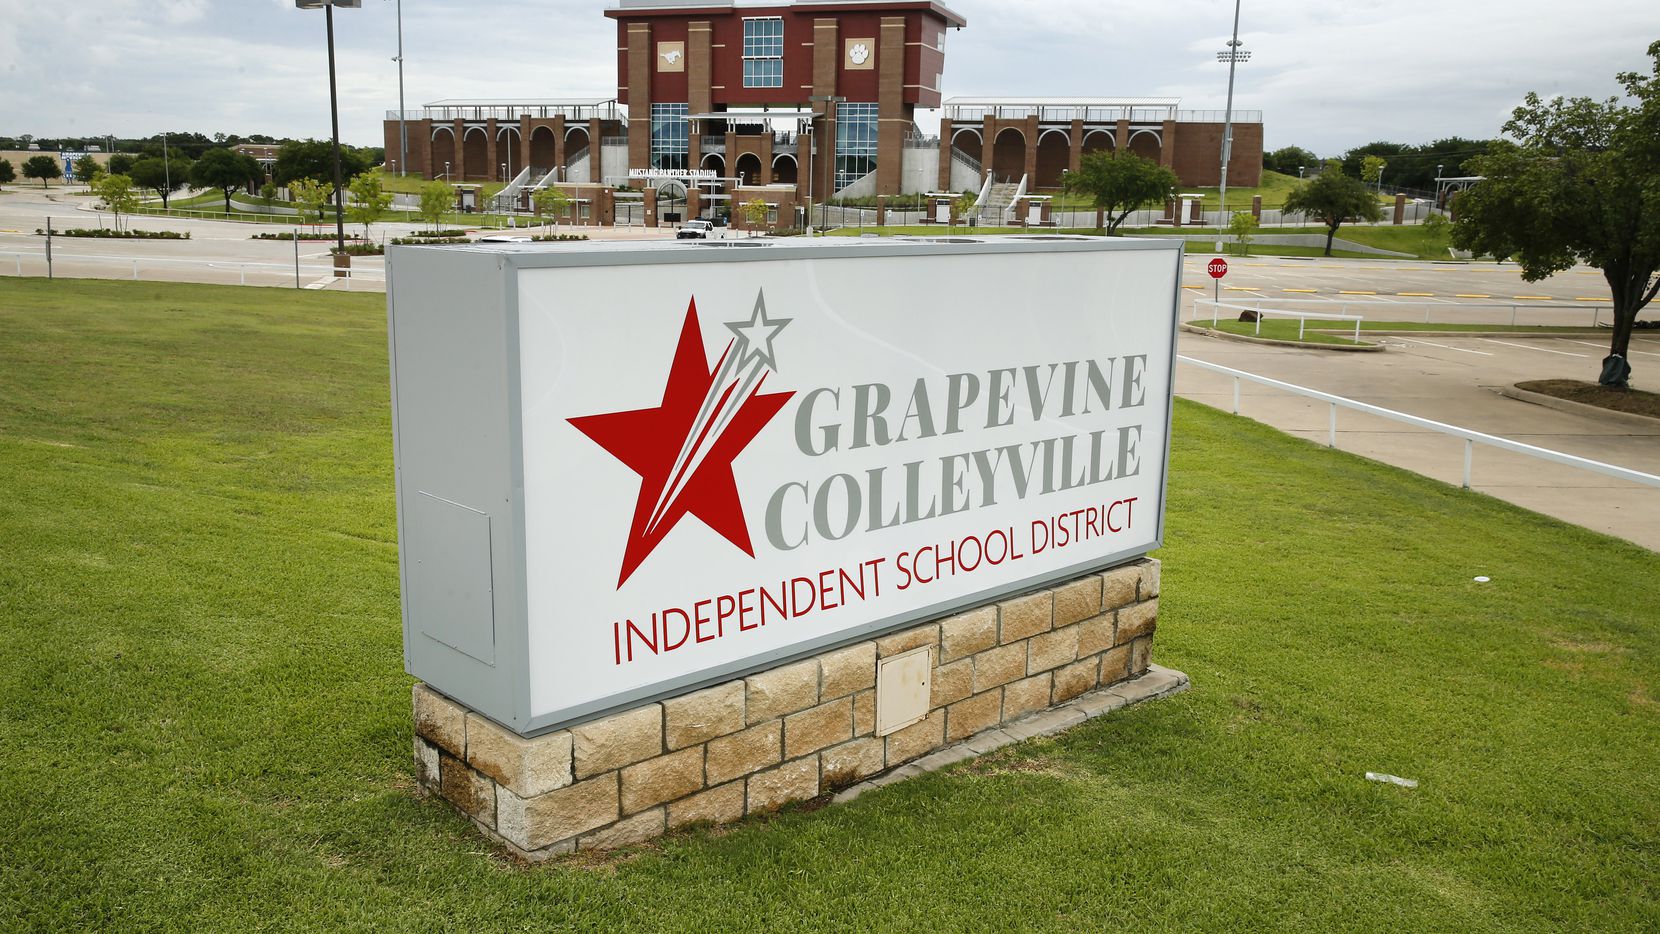 The Grapevine-Colleyville  ISD sign is pictured before Mustang Panther Stadium in Grapevine,...